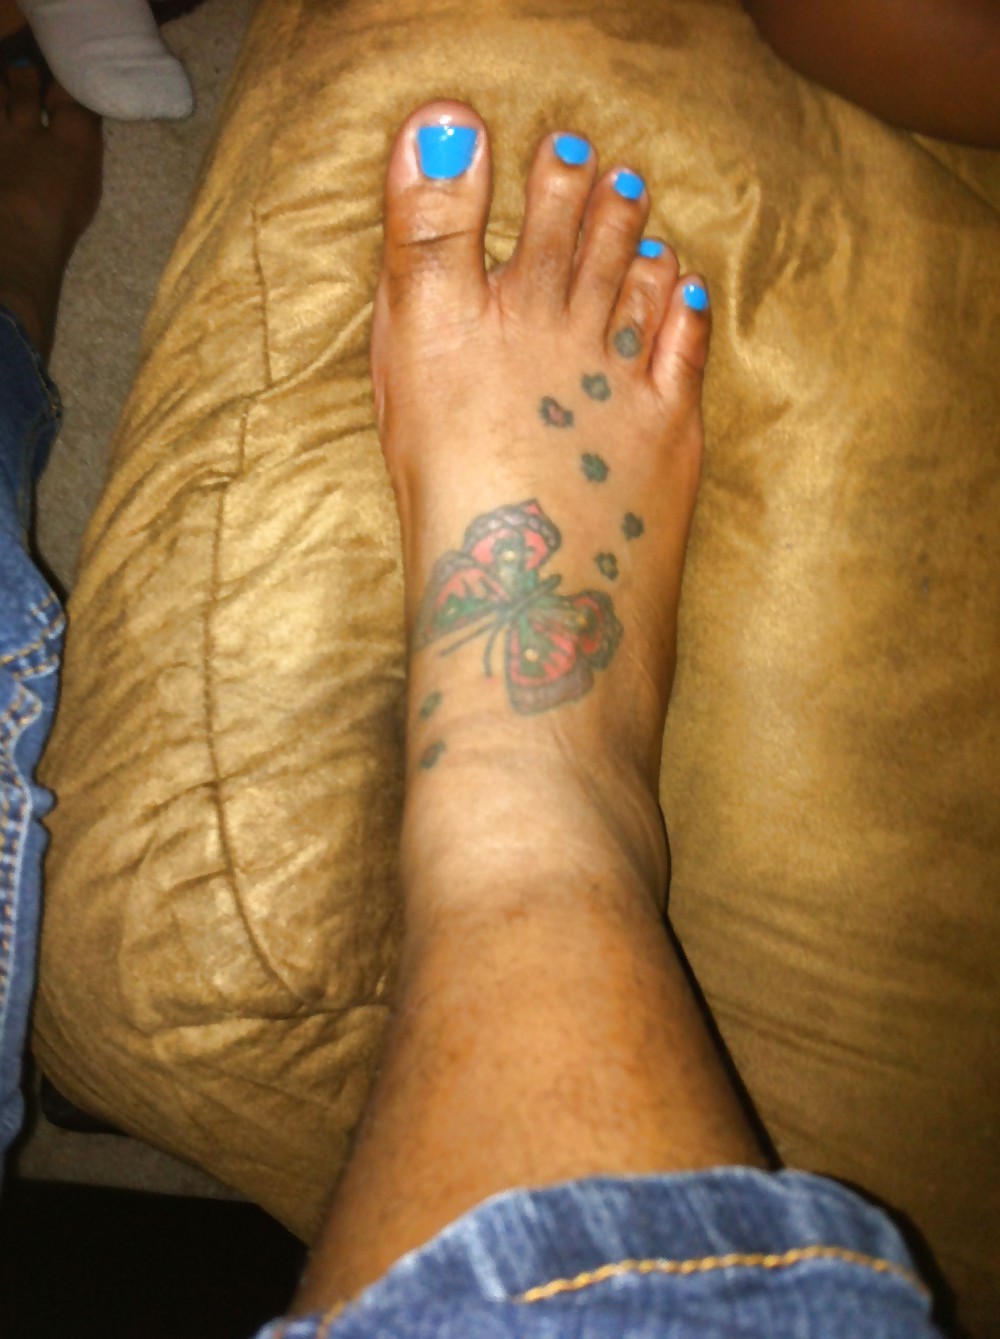 Sex New Blue Painted Toes from a Freind image